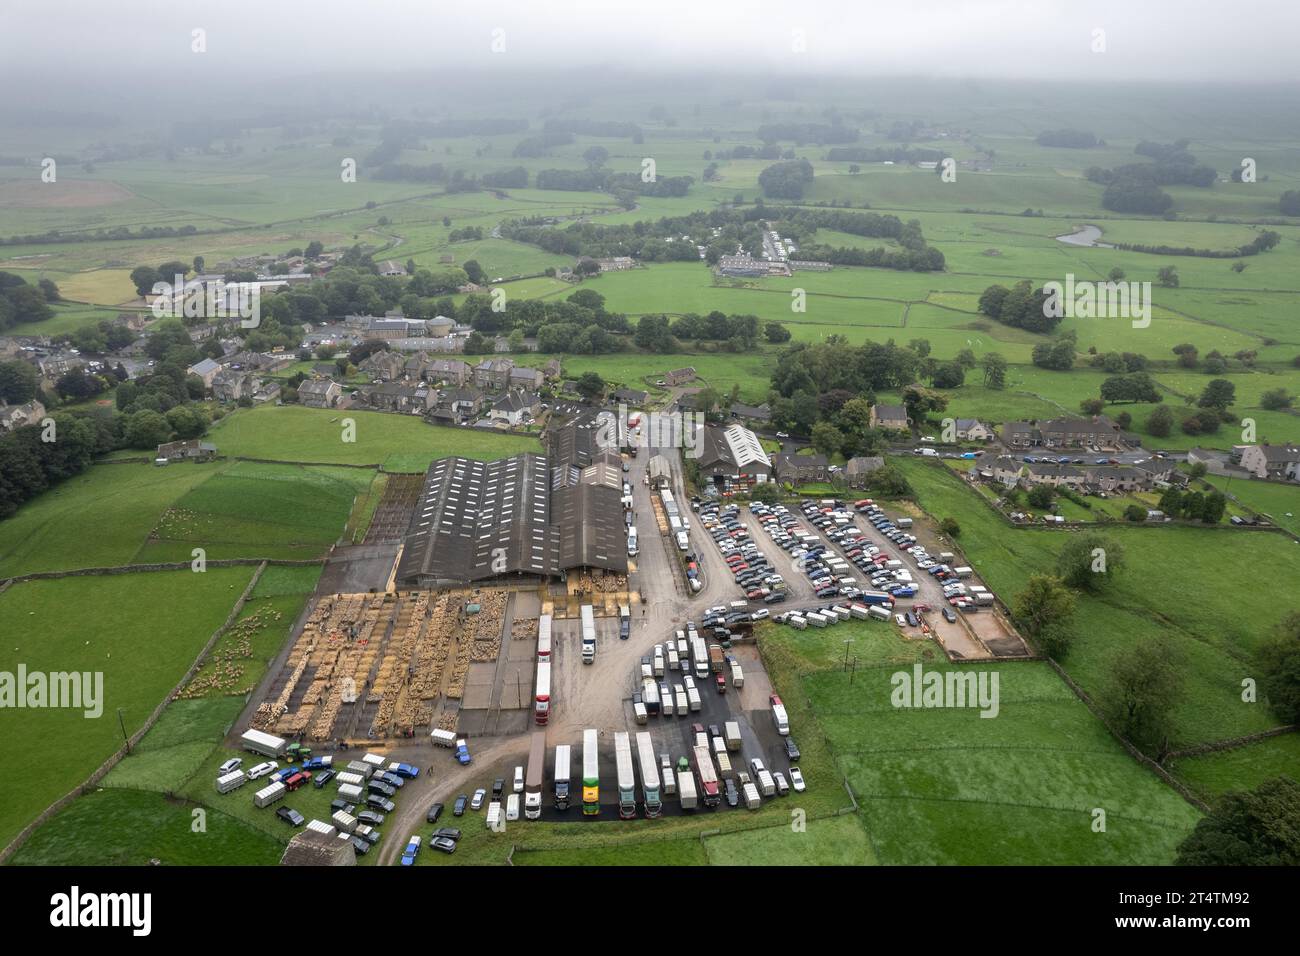 https://c8.alamy.com/comp/2T4TM92/aerial-view-of-the-north-of-england-mule-gimmer-lamb-sale-at-hawes-auction-mart-north-yorkshire-uk-2T4TM92.jpg